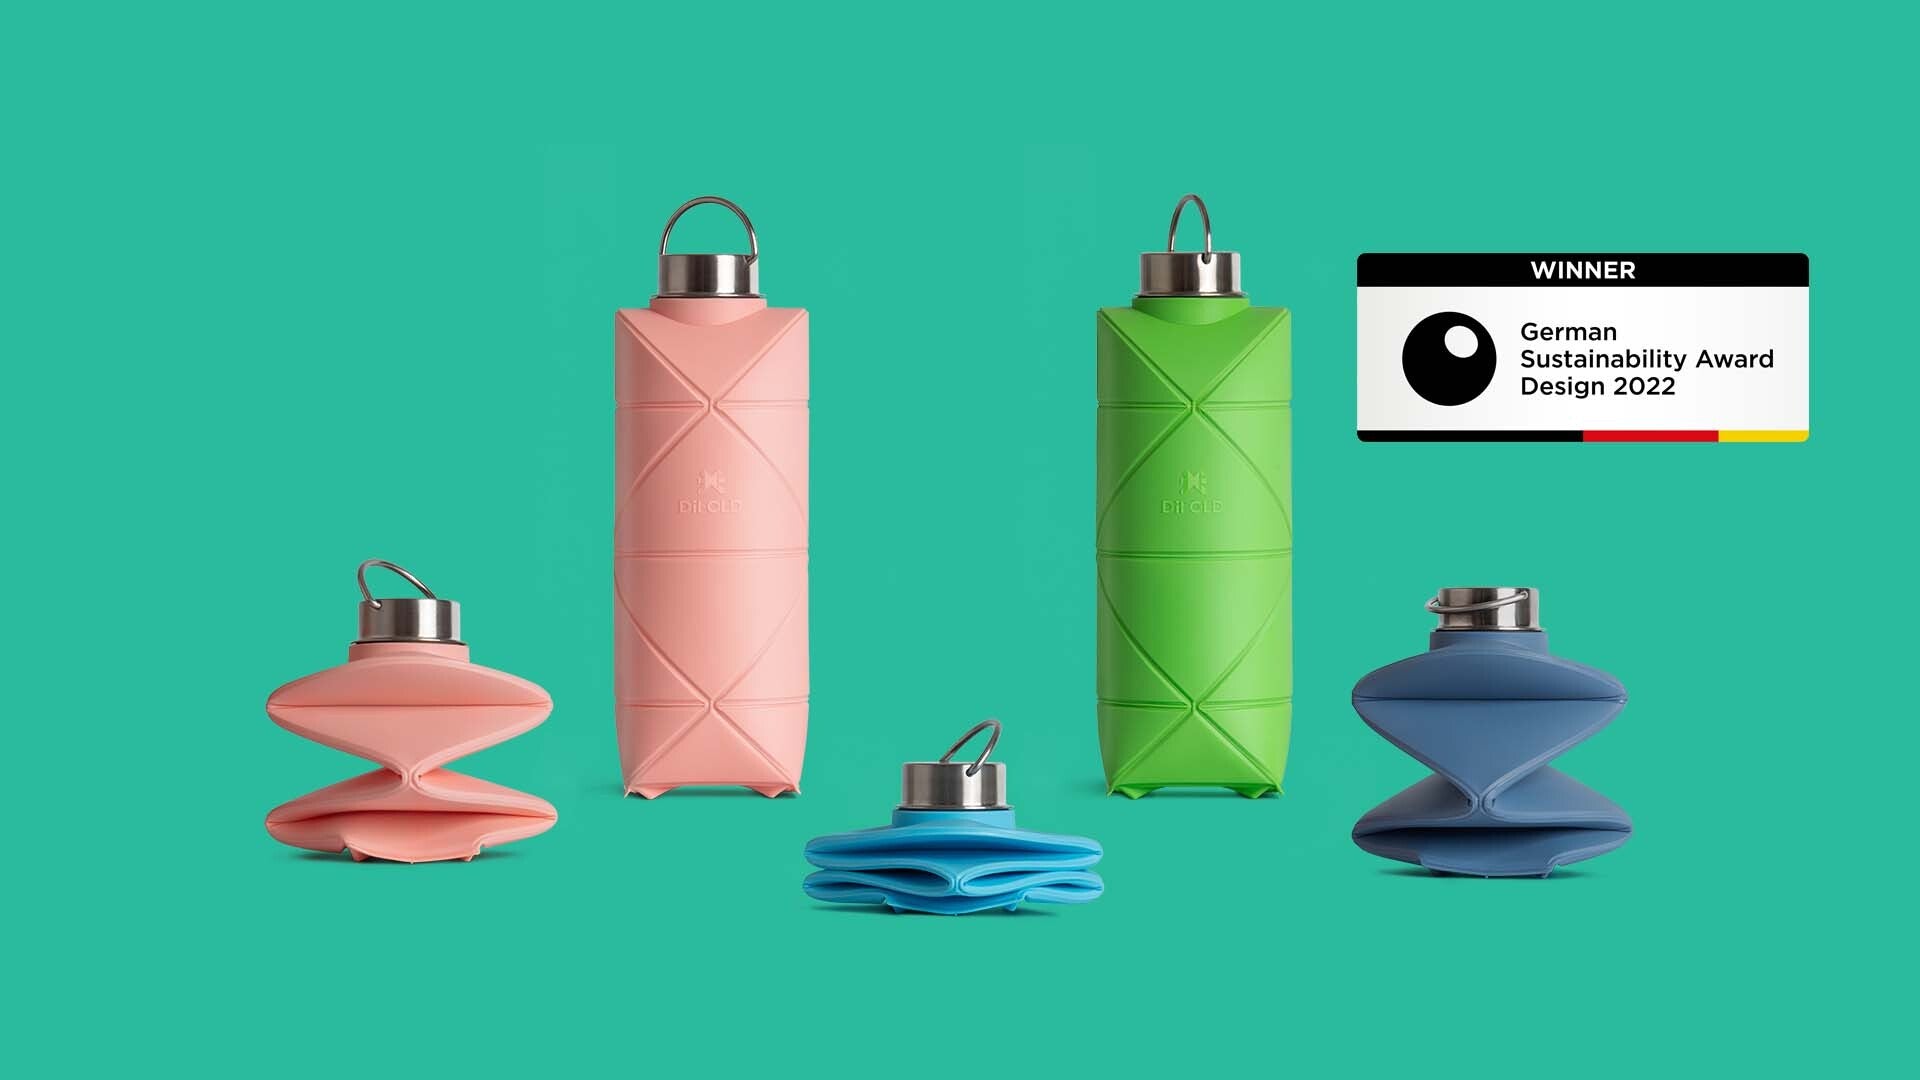 Meet DiFOLD Origami Bottle! PLANT-Based. Foldable. Sturdy.